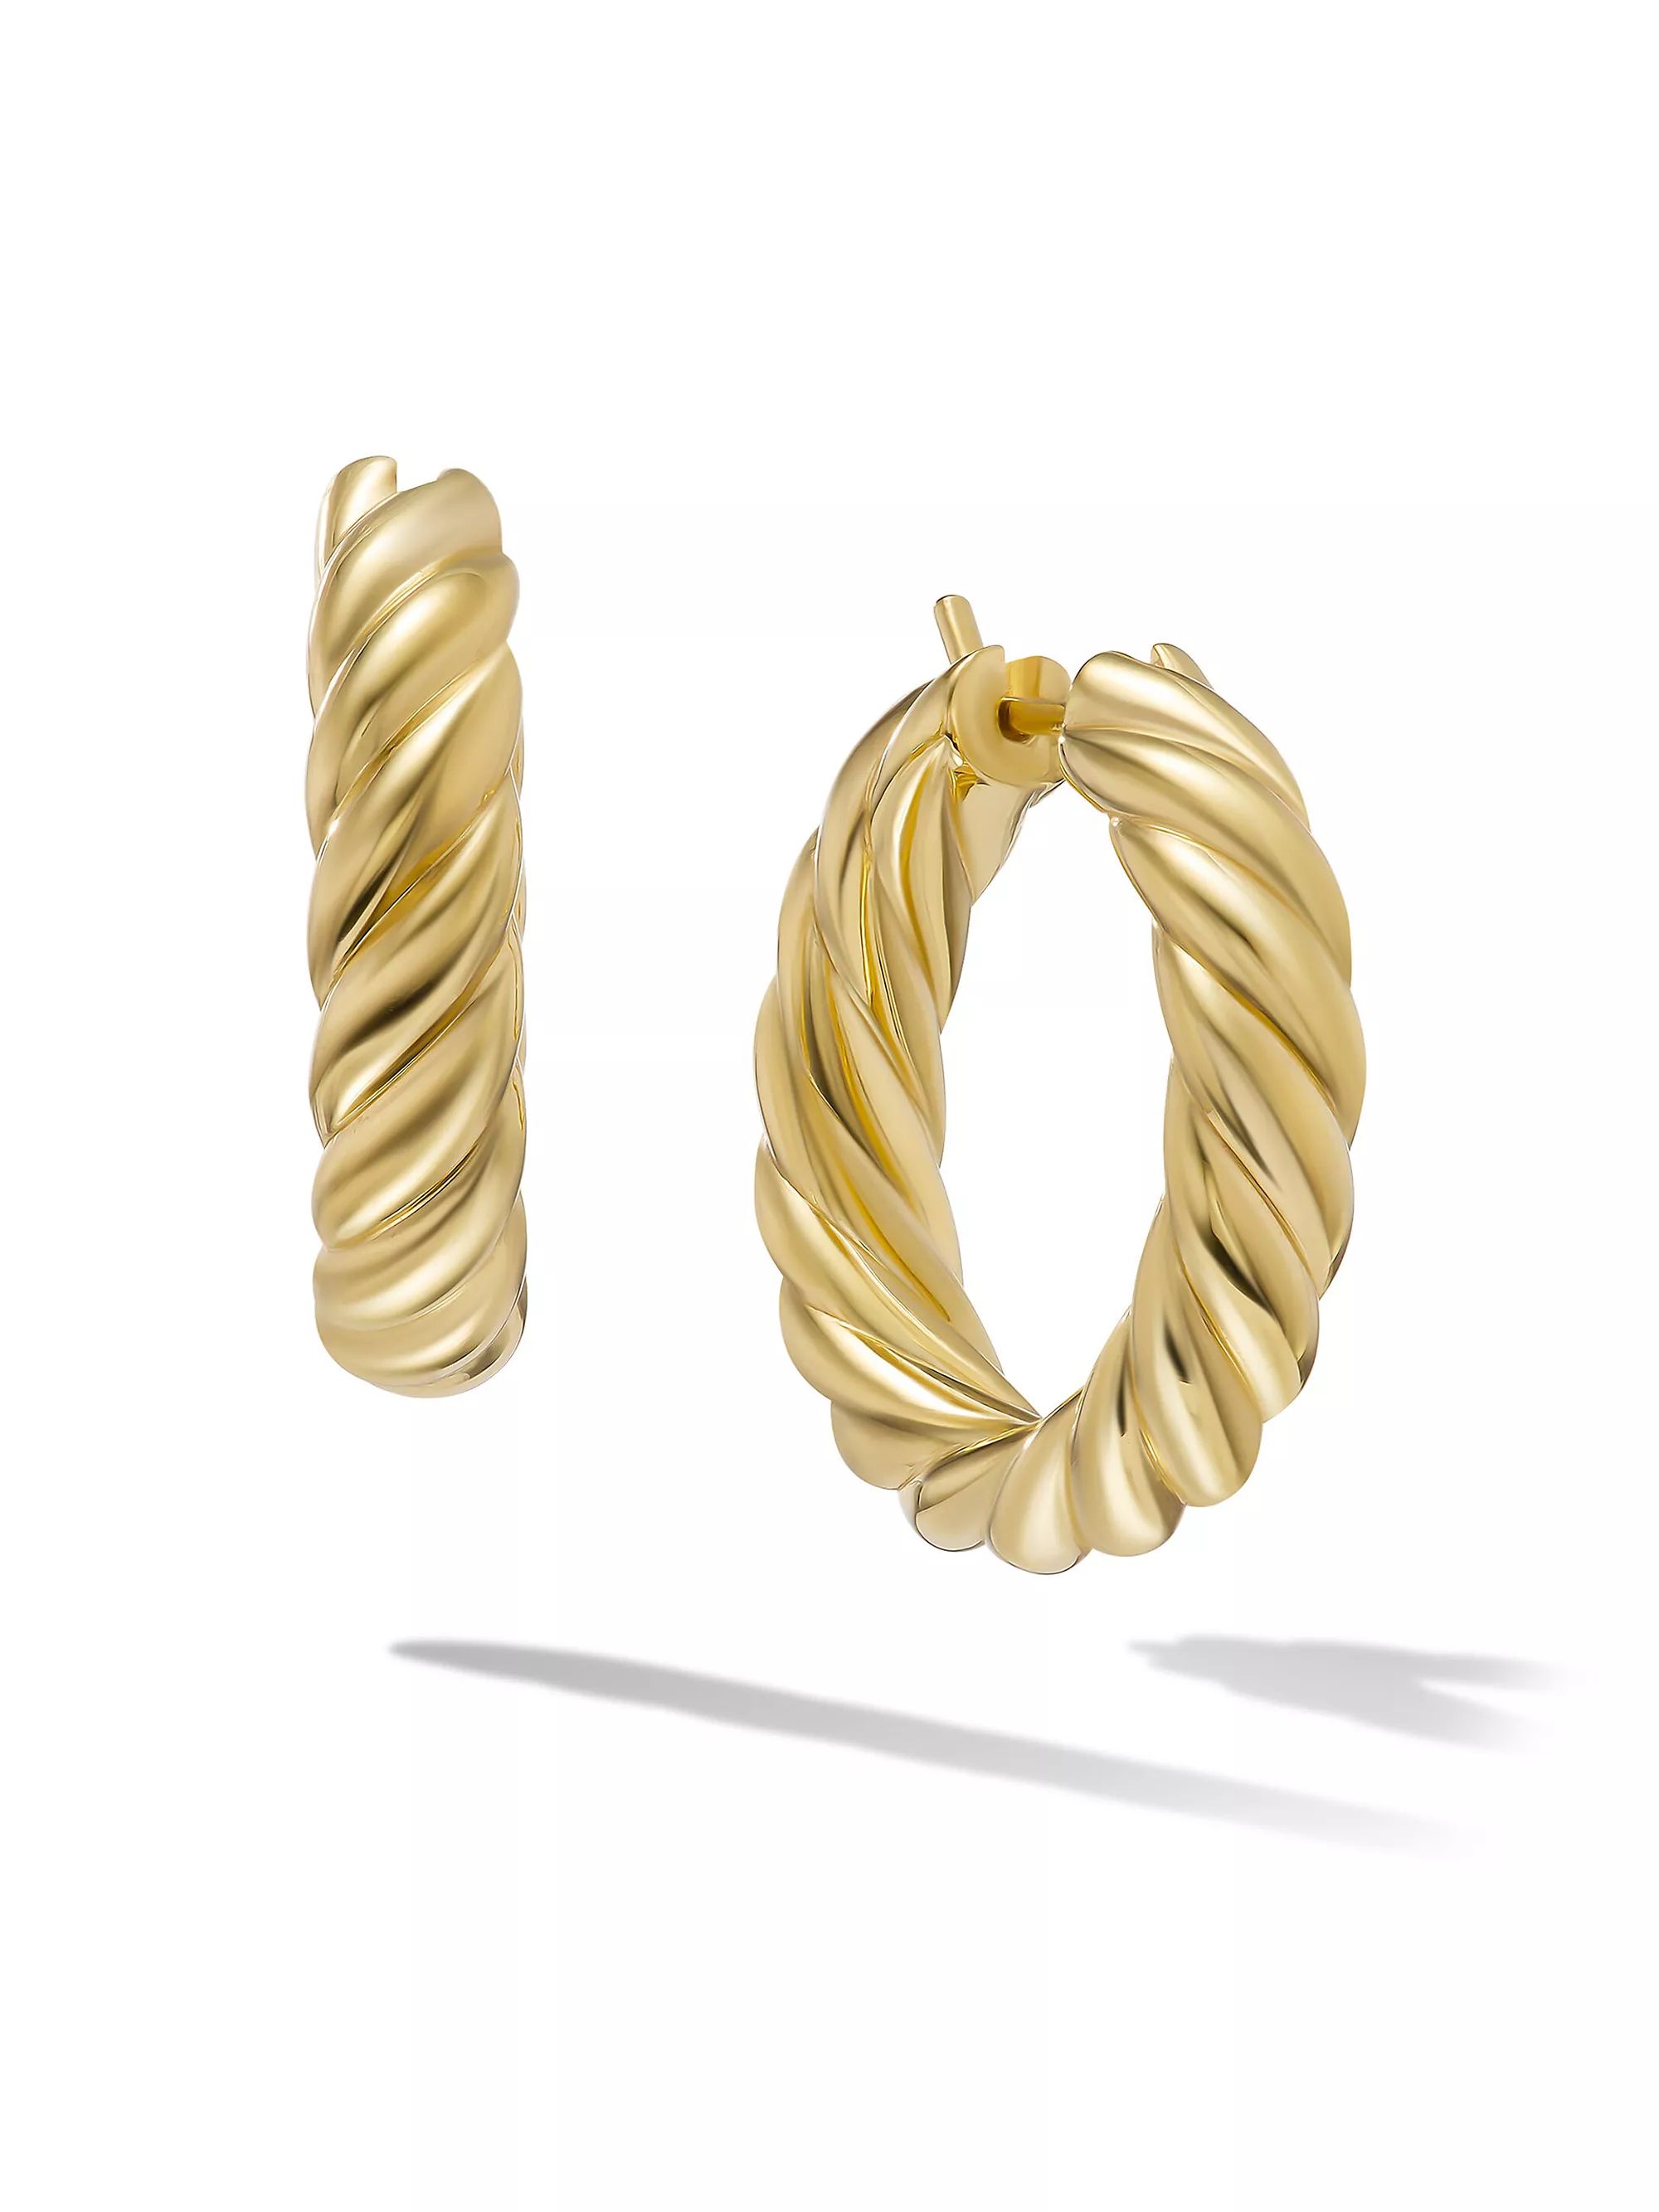 Sculpted Cable Hoops Earrings in 18K Yellow Gold | Saks Fifth Avenue